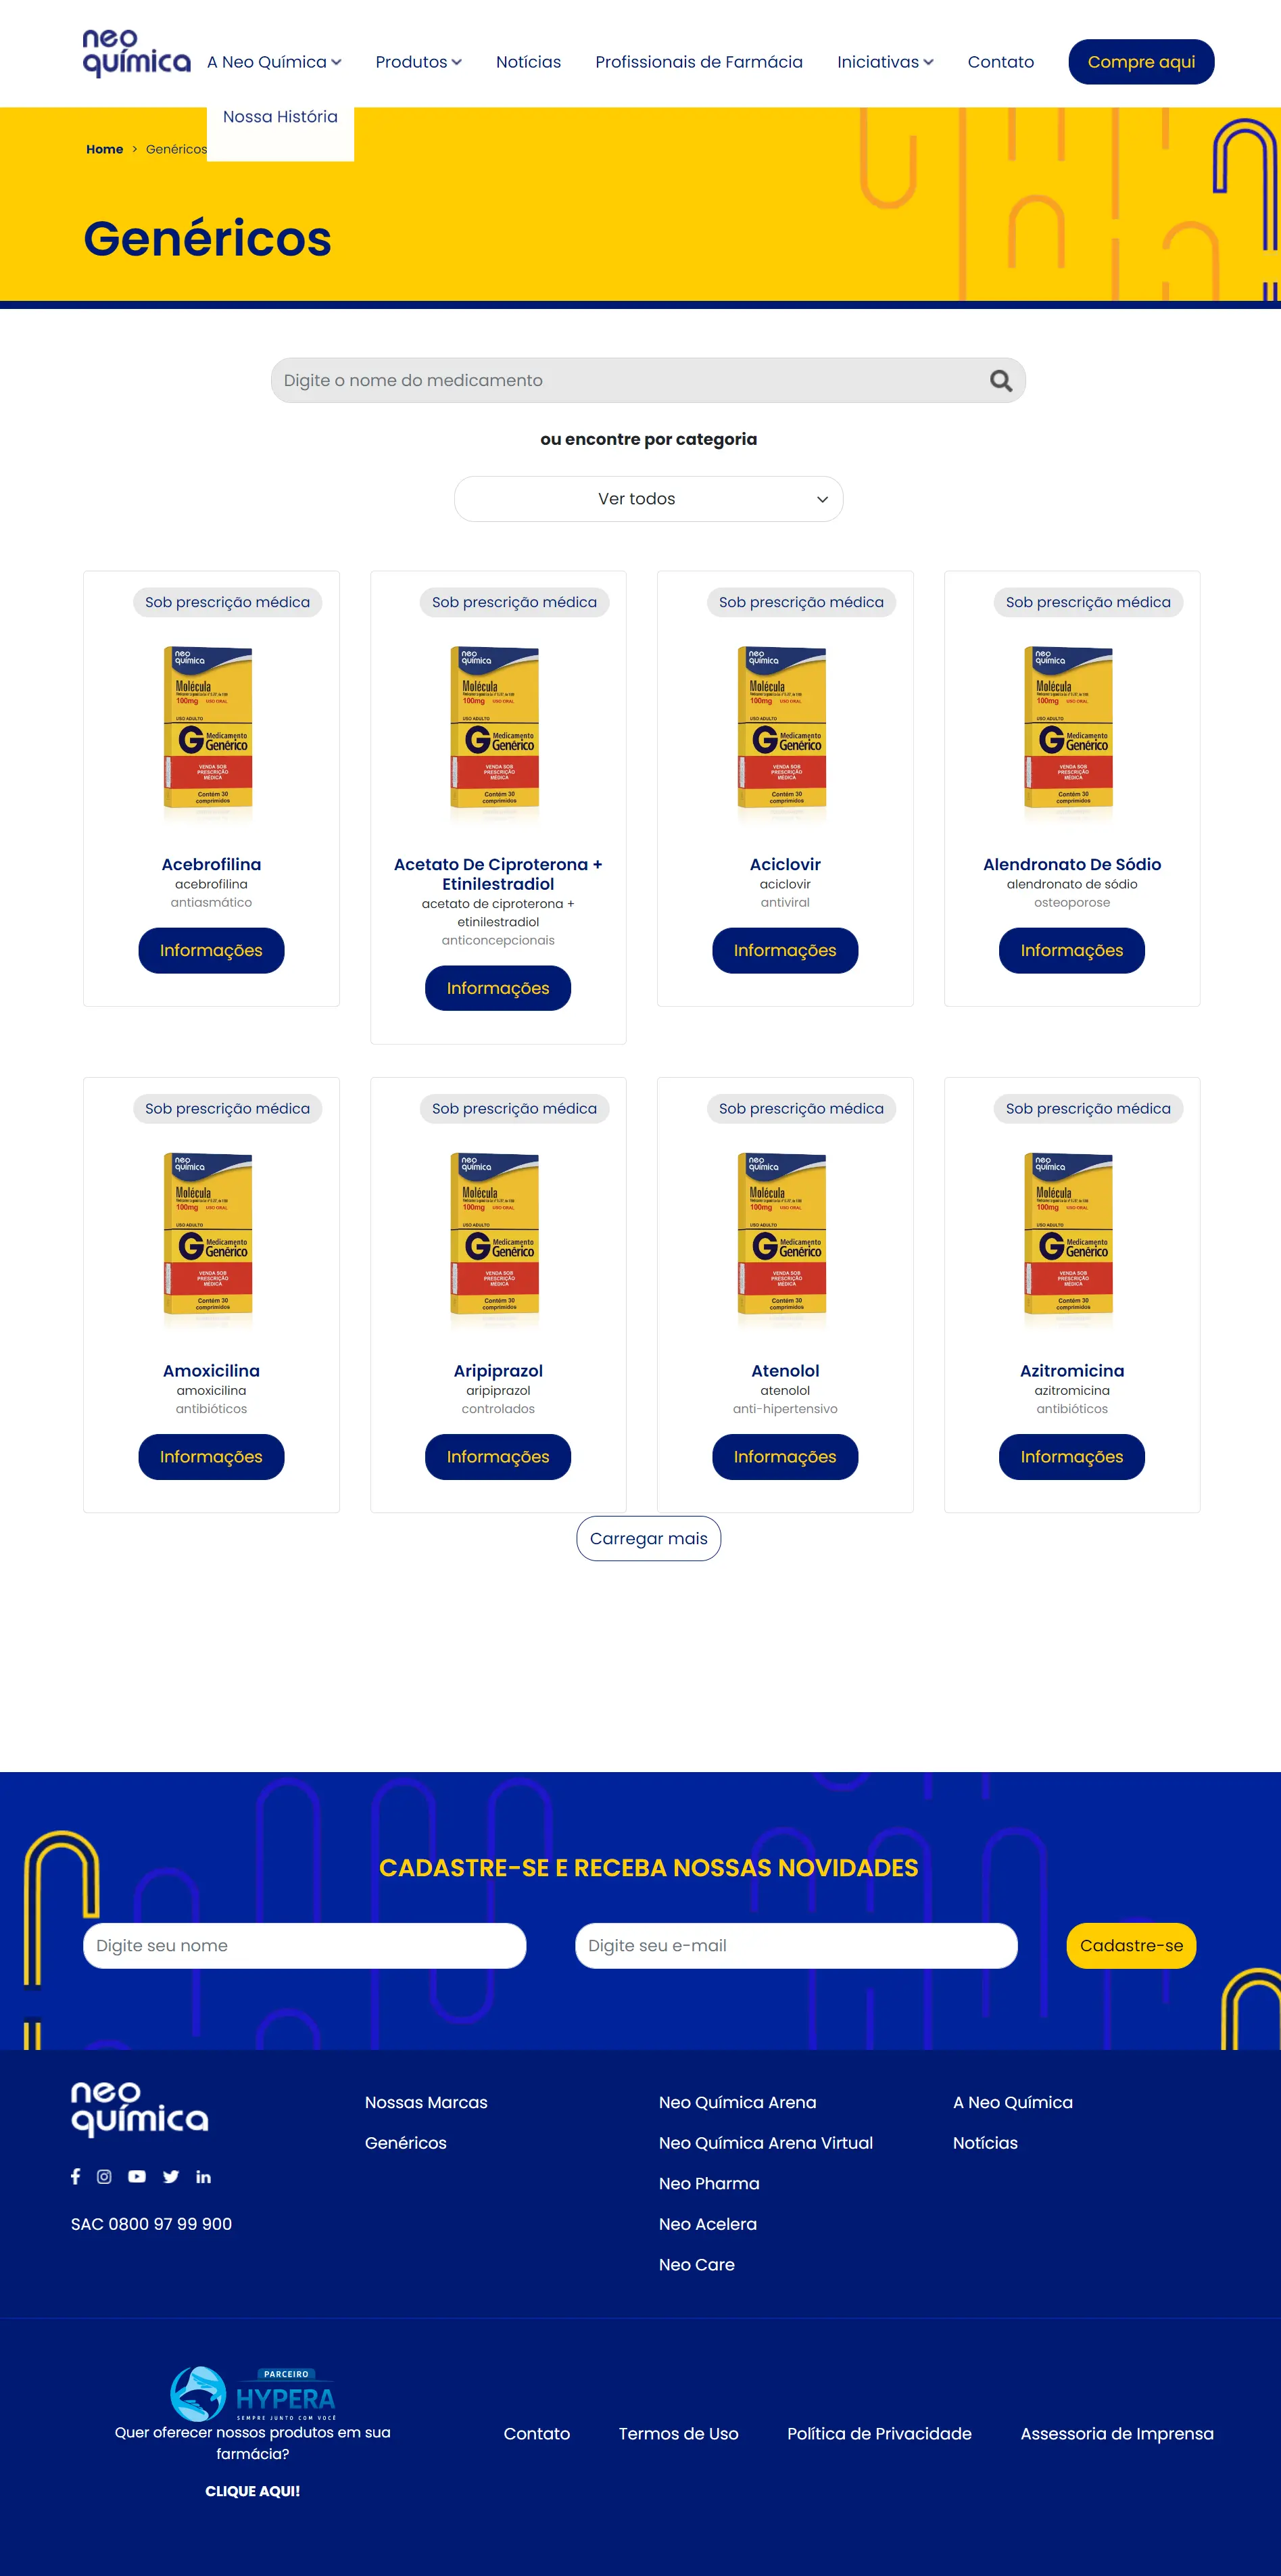 Screenshot image of the Generic products page on the Neo Química website.